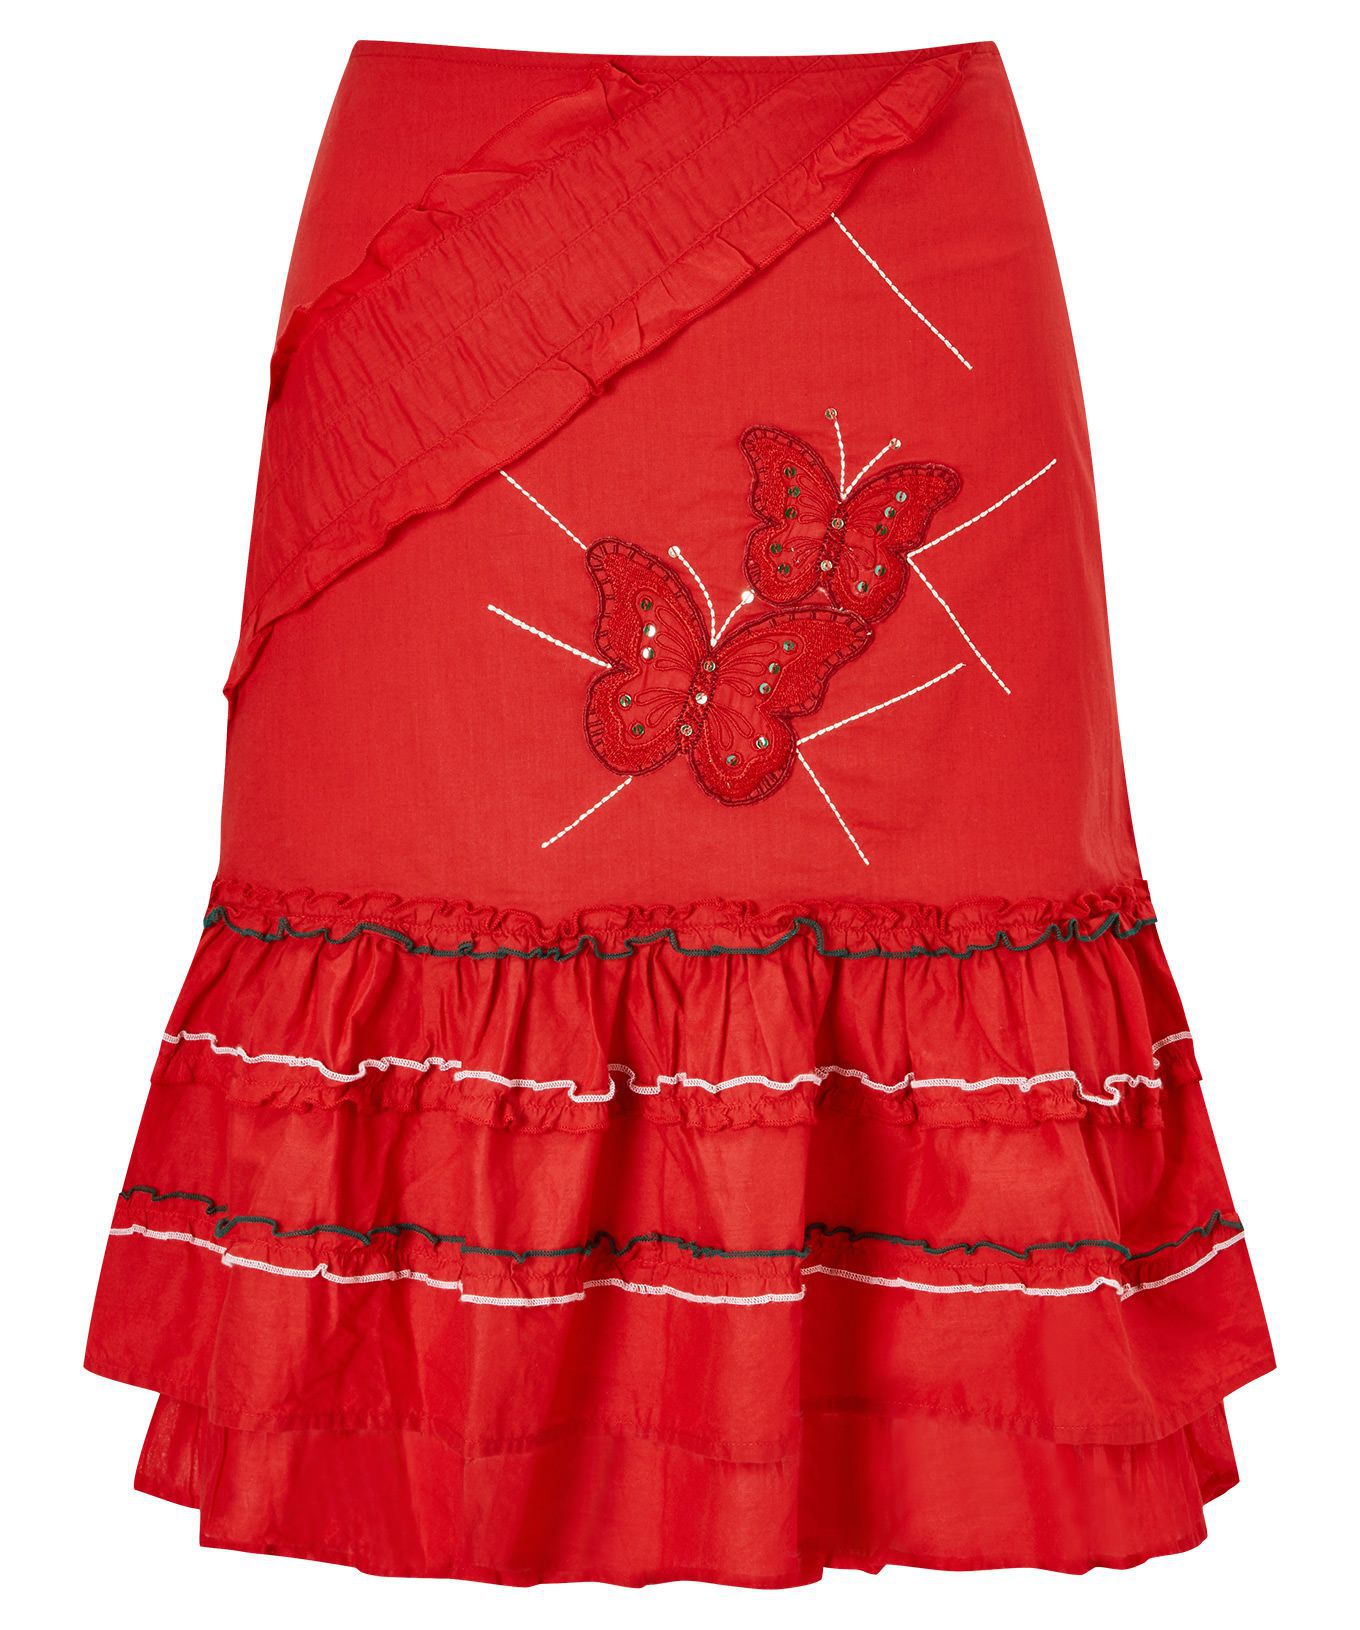 SL1452 Ex Chainstore Red Embroidered Salsa Skirt x12